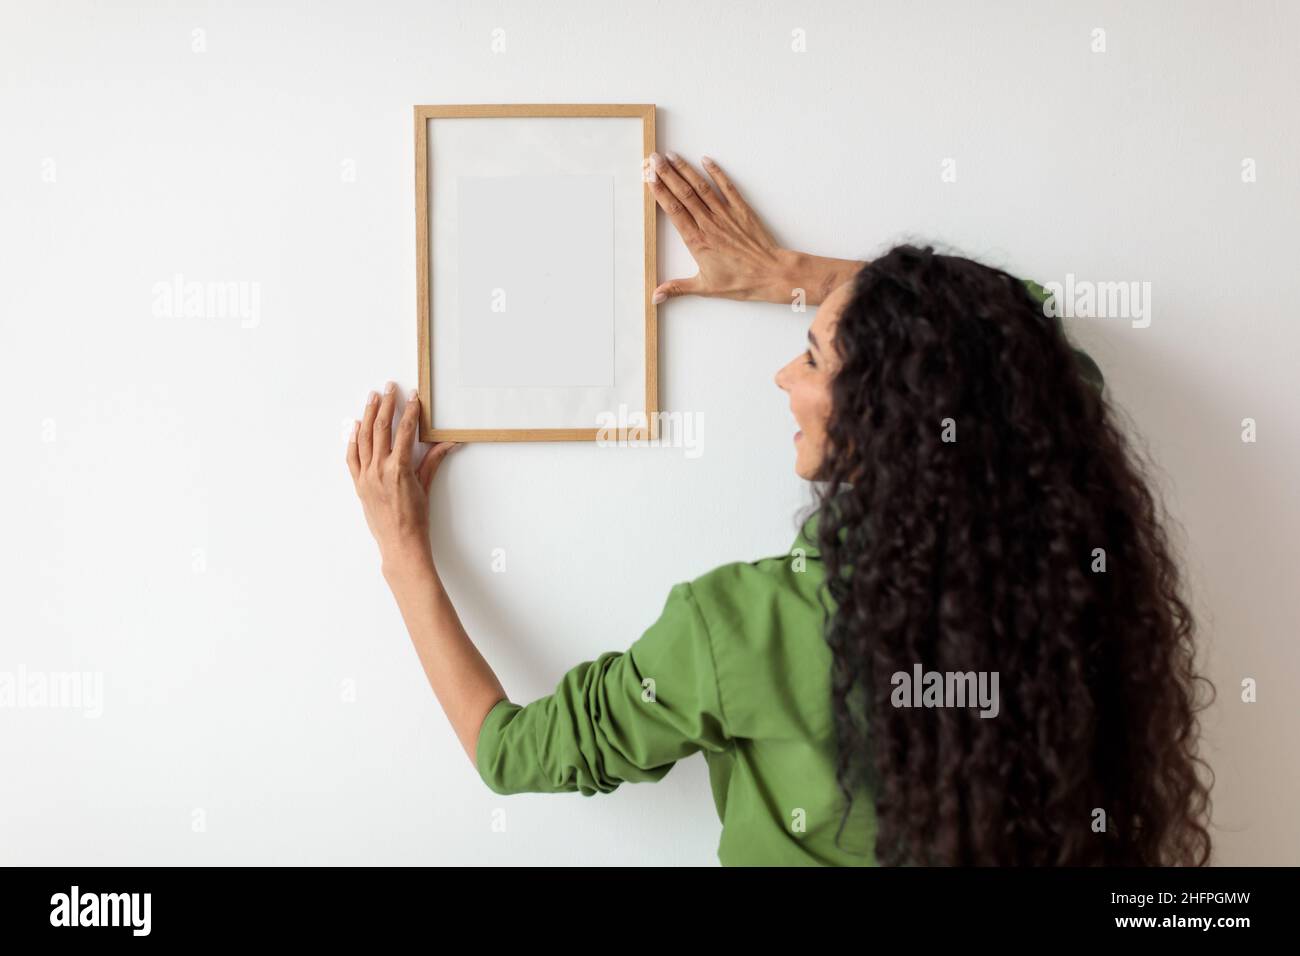 Female Hanging Empty Picture In Frame On White Wall Indoors Stock Photo